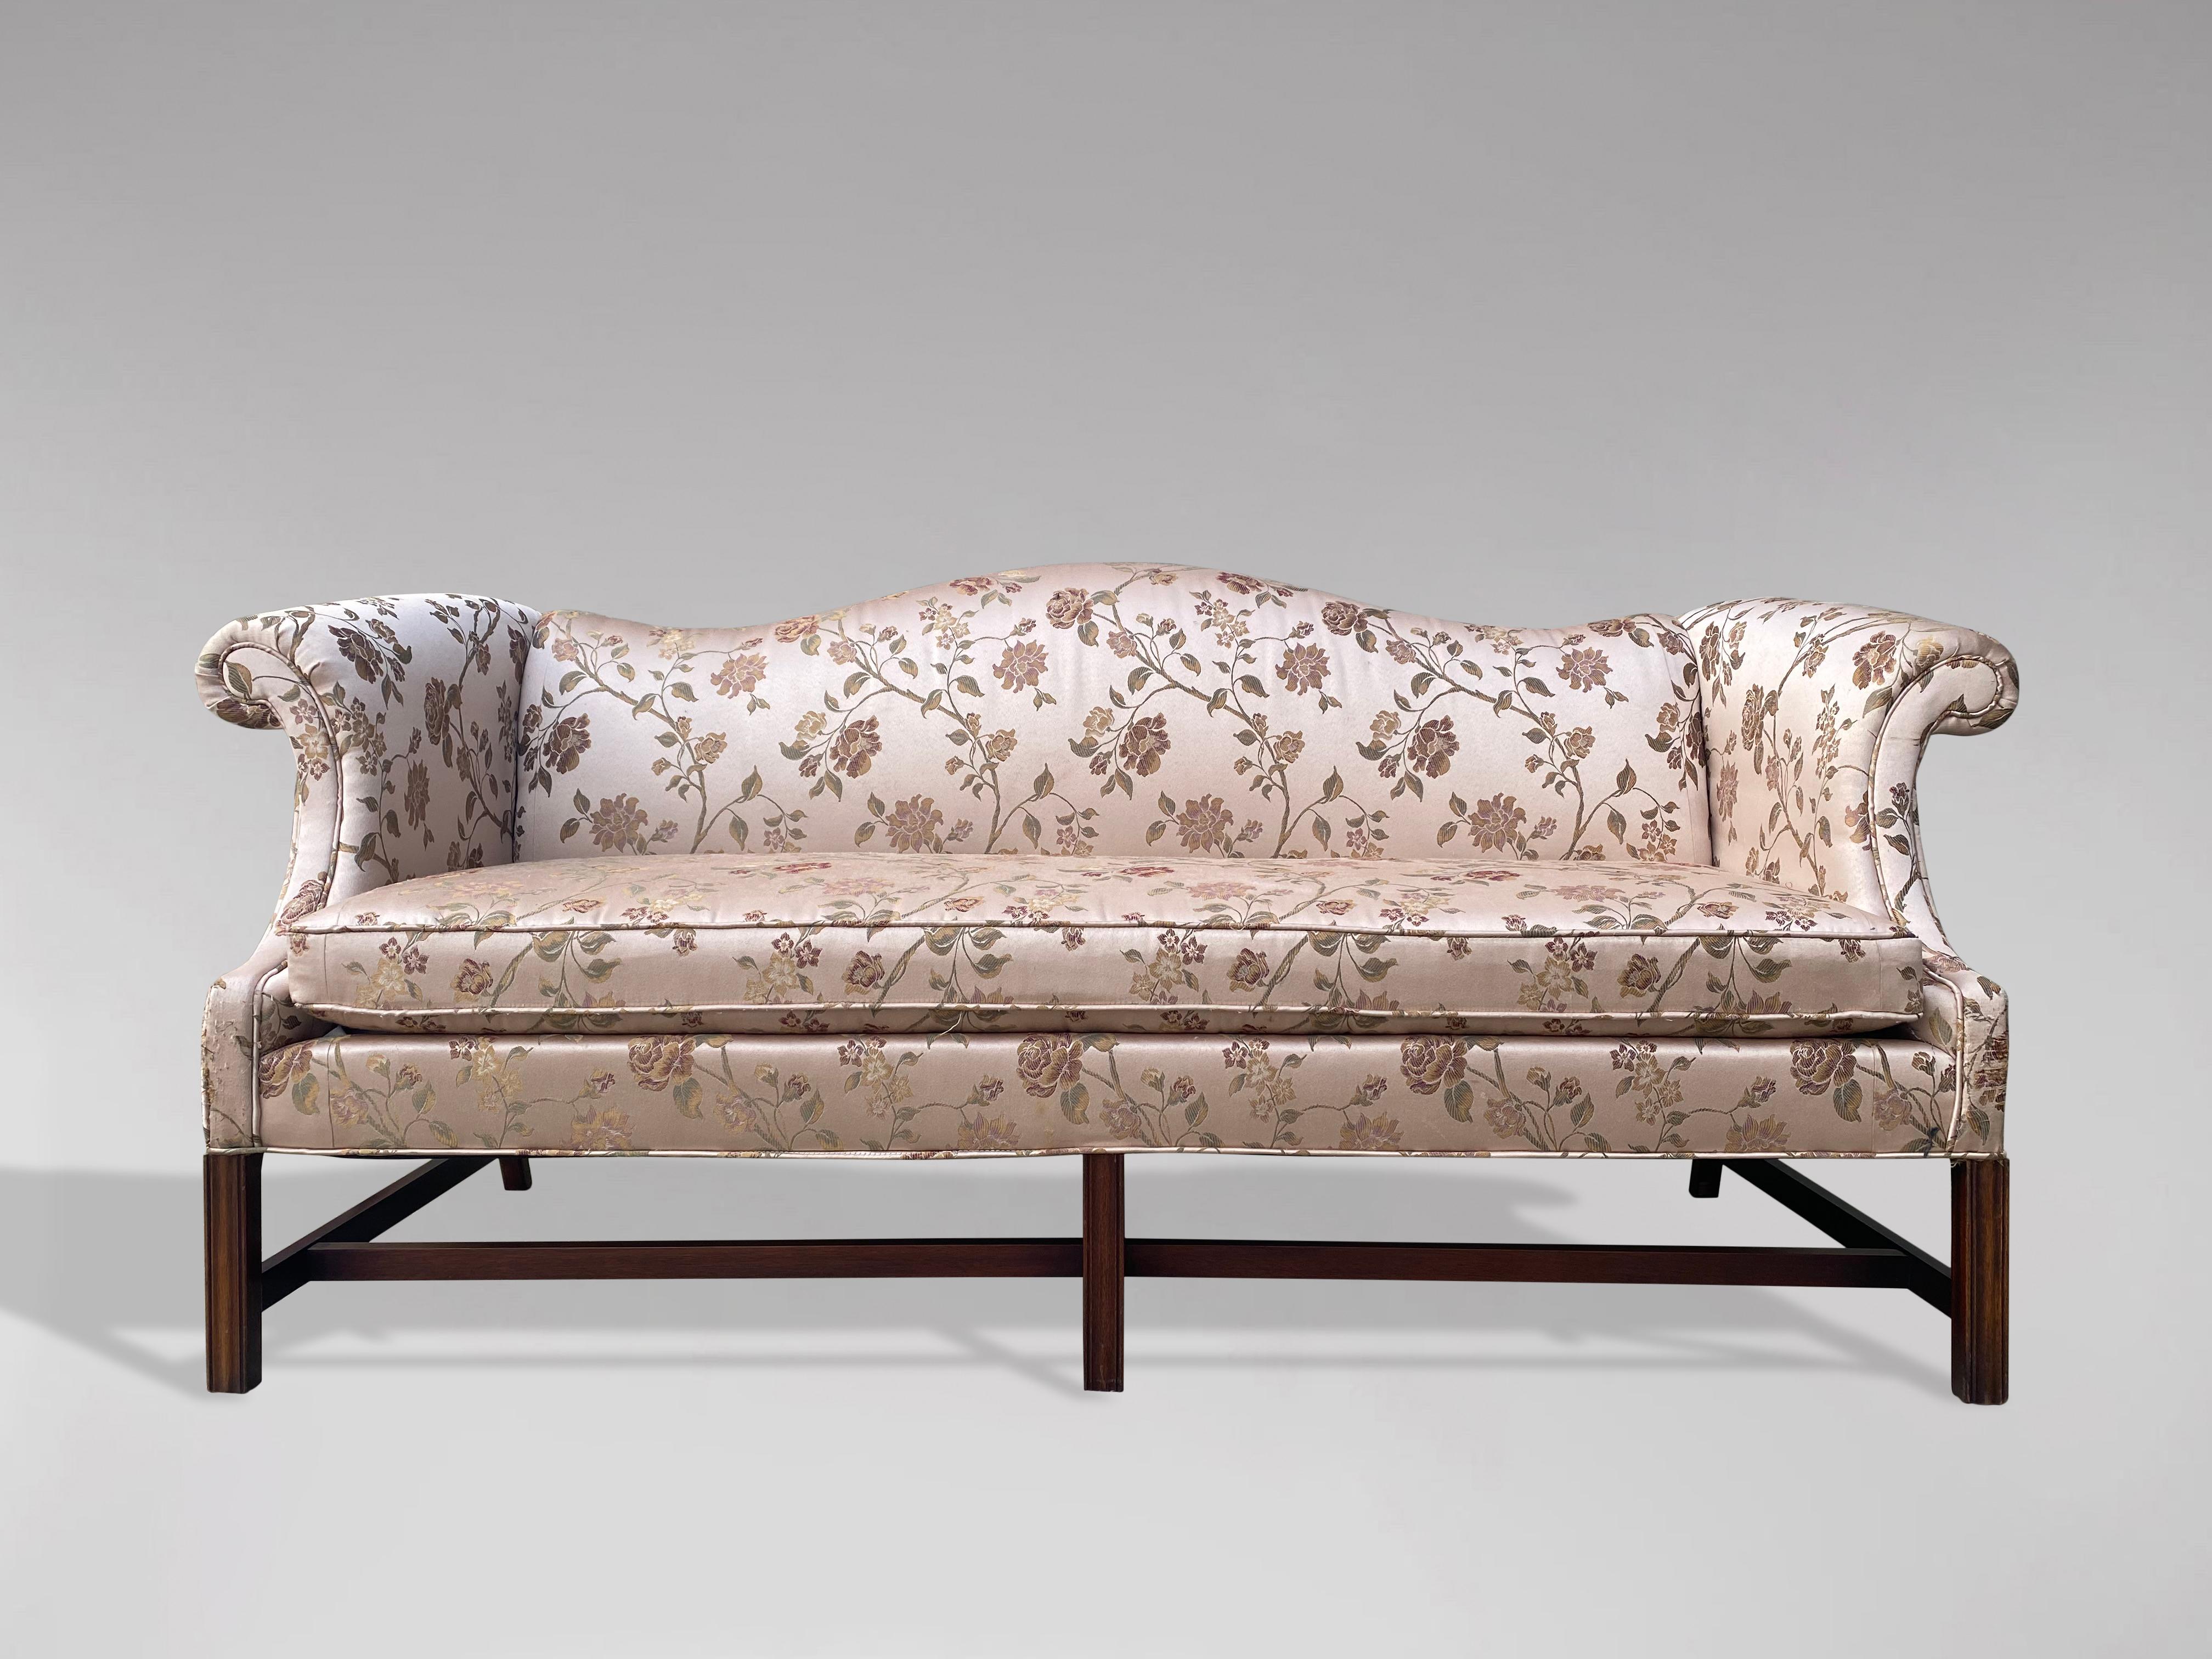 An elegant 20th century, George III style, upholstered humpback sofa. Finely upholstered with outscrolling arms raised over three moulded front legs and two back legs with a lovely sweep to them, supported by distinctive stretchers. Very comfortable